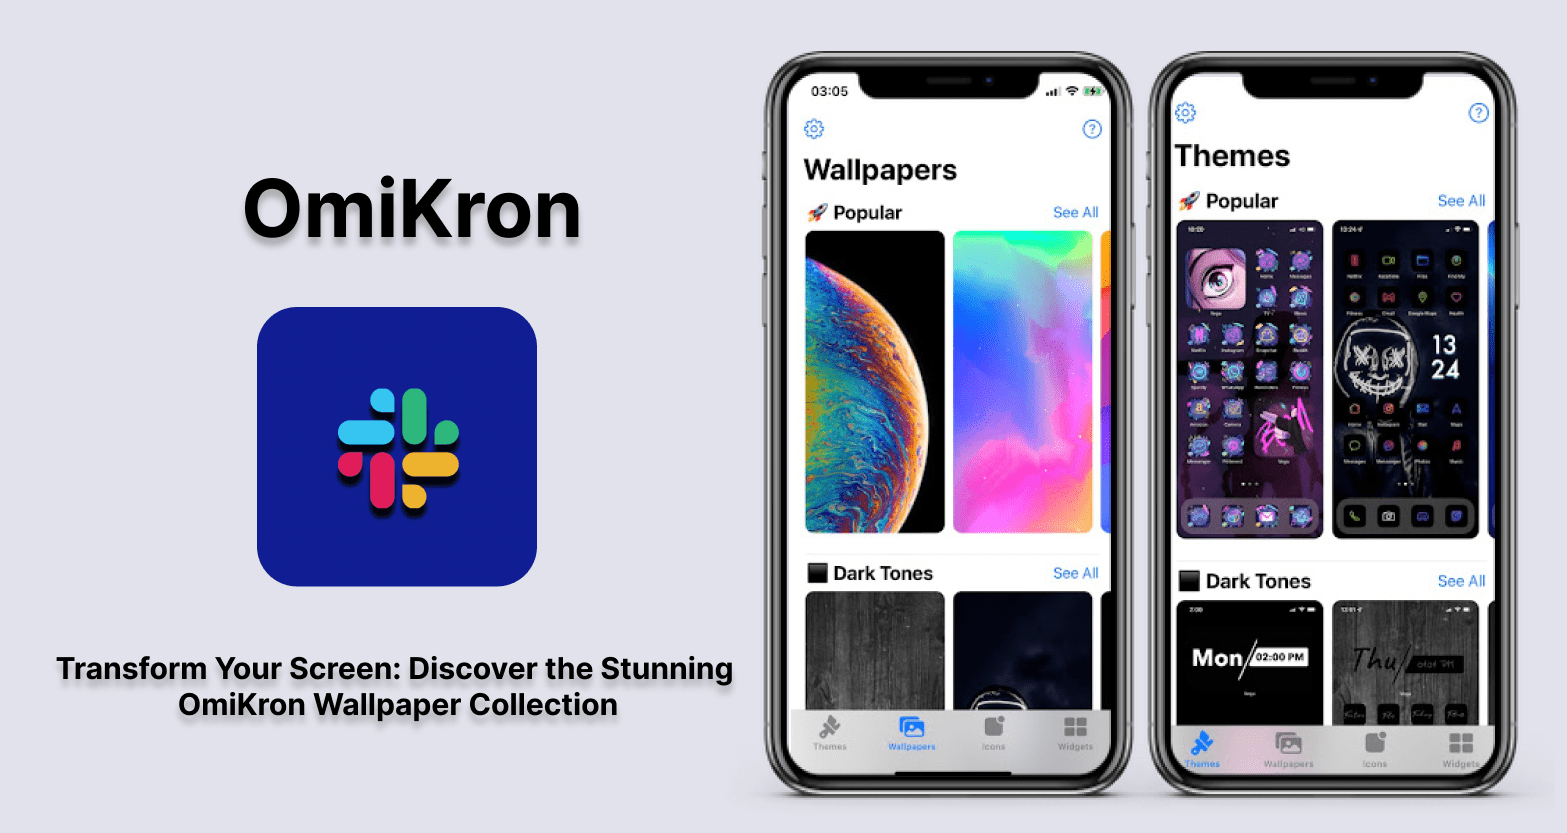 OmiKron Wallpaper Collection